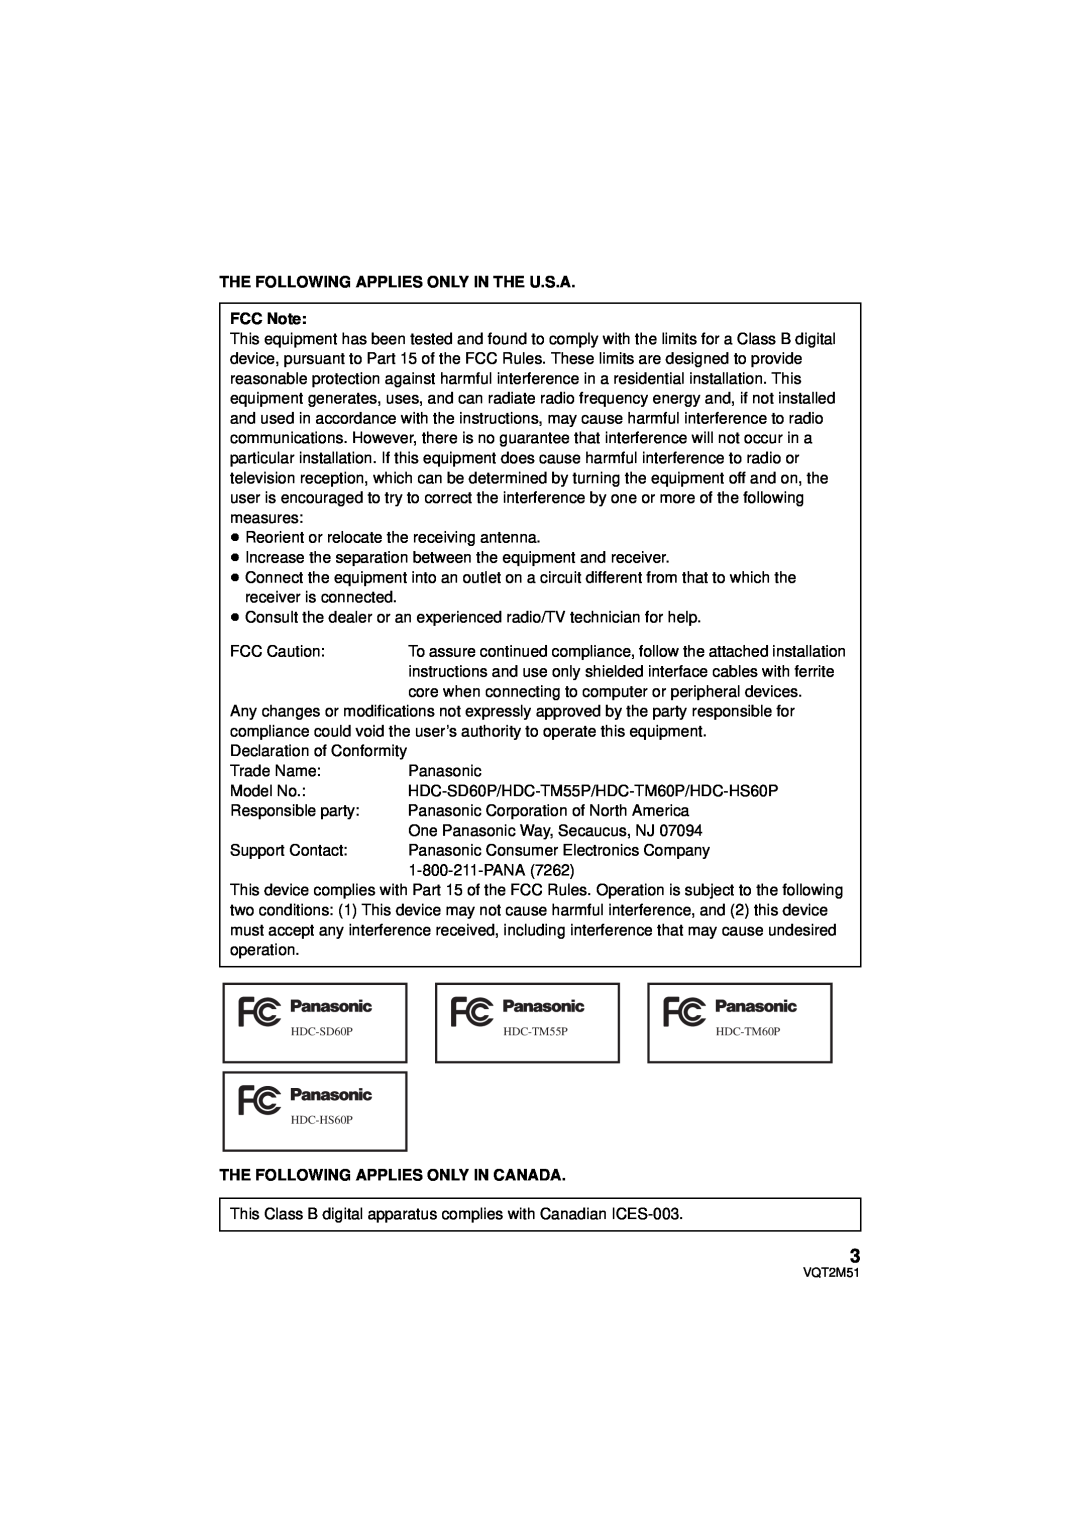 Panasonic HDC-HS60P/PC THE FOLLOWING APPLIES ONLY IN THE U.S.A FCC Note, The Following Applies Only In Canada 